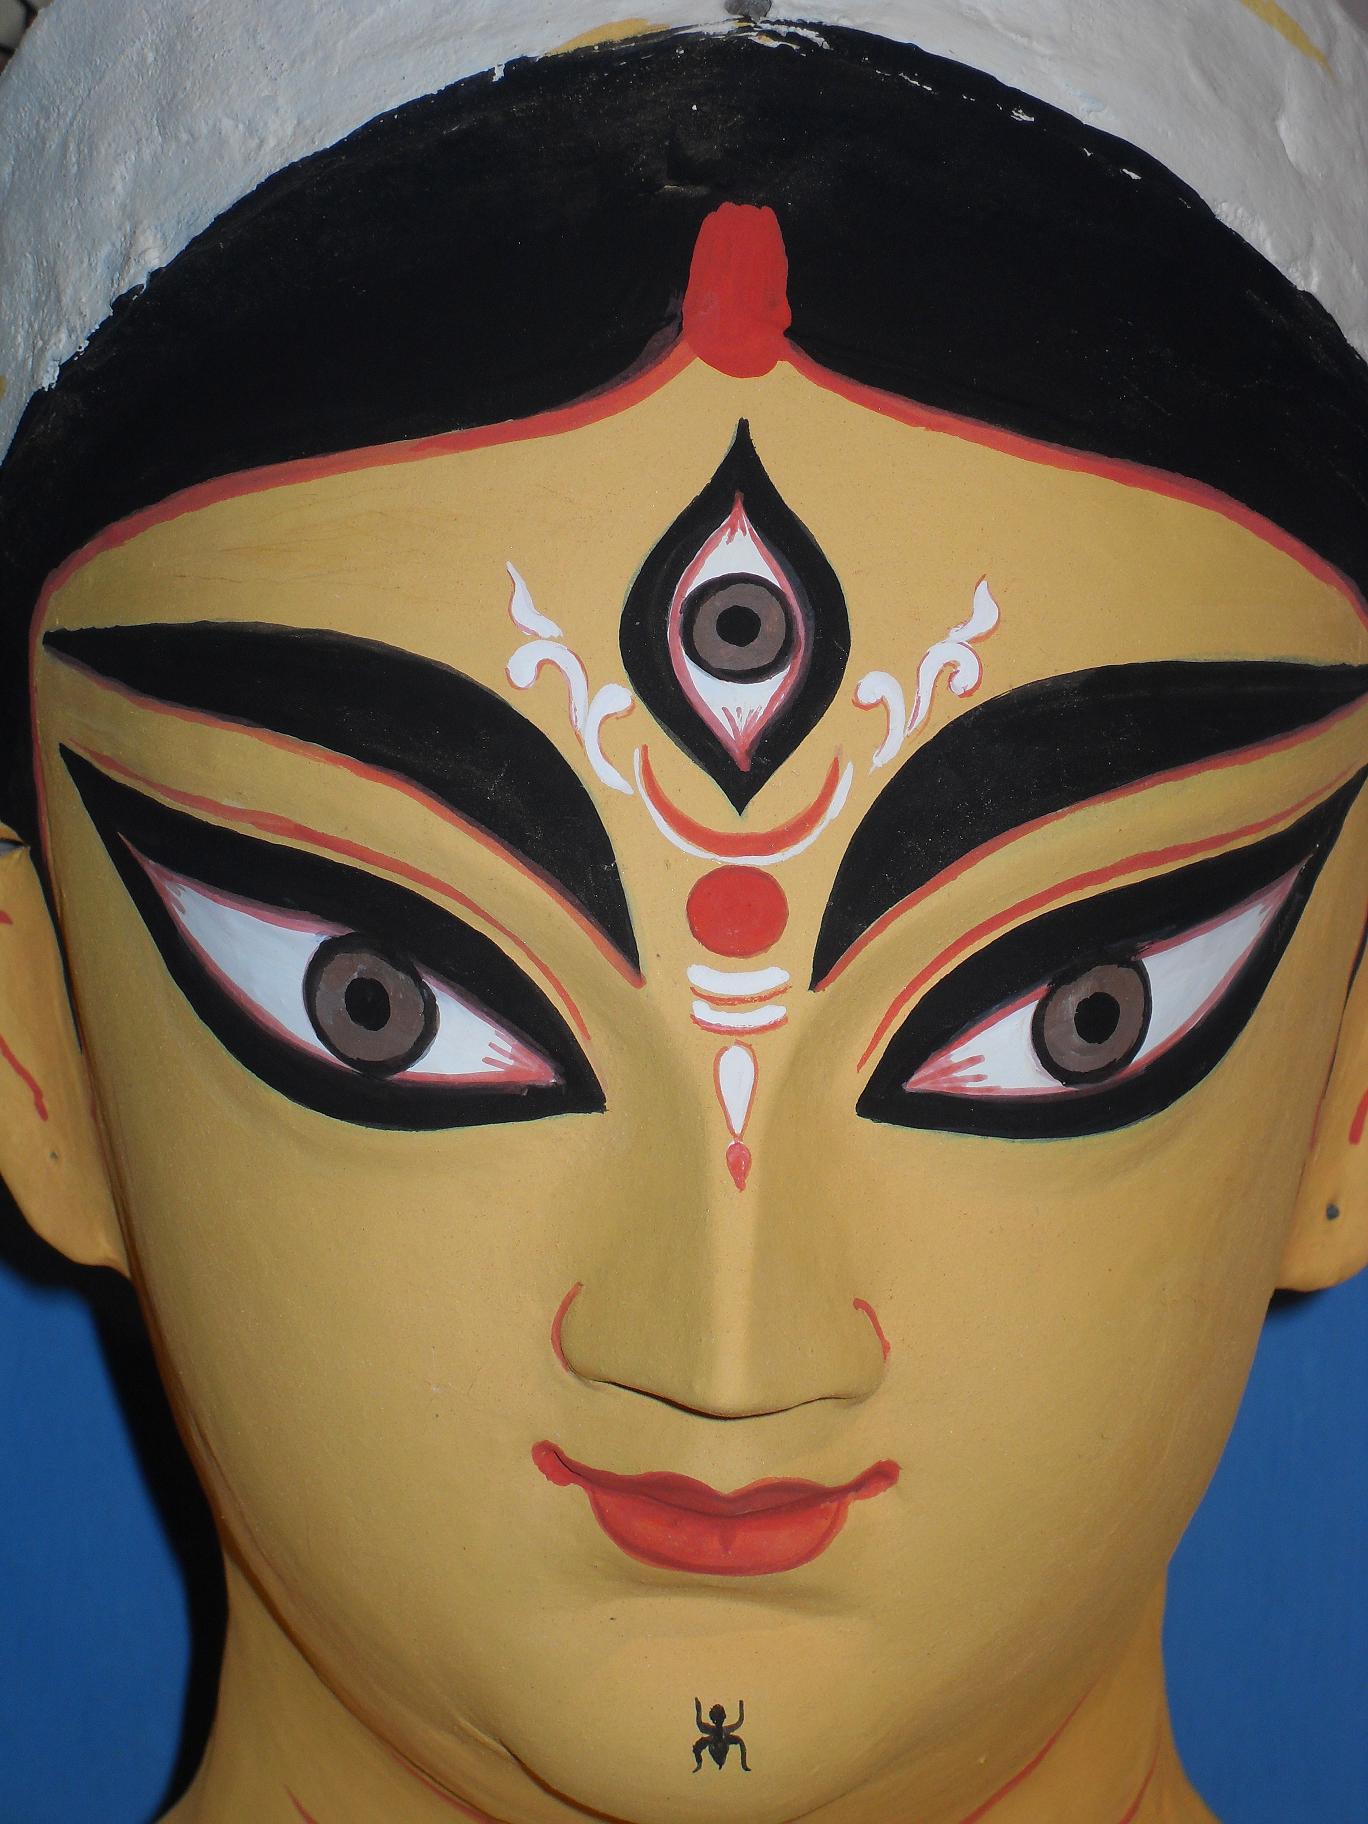 The Goddess Durga after the painting of the eye ceremony